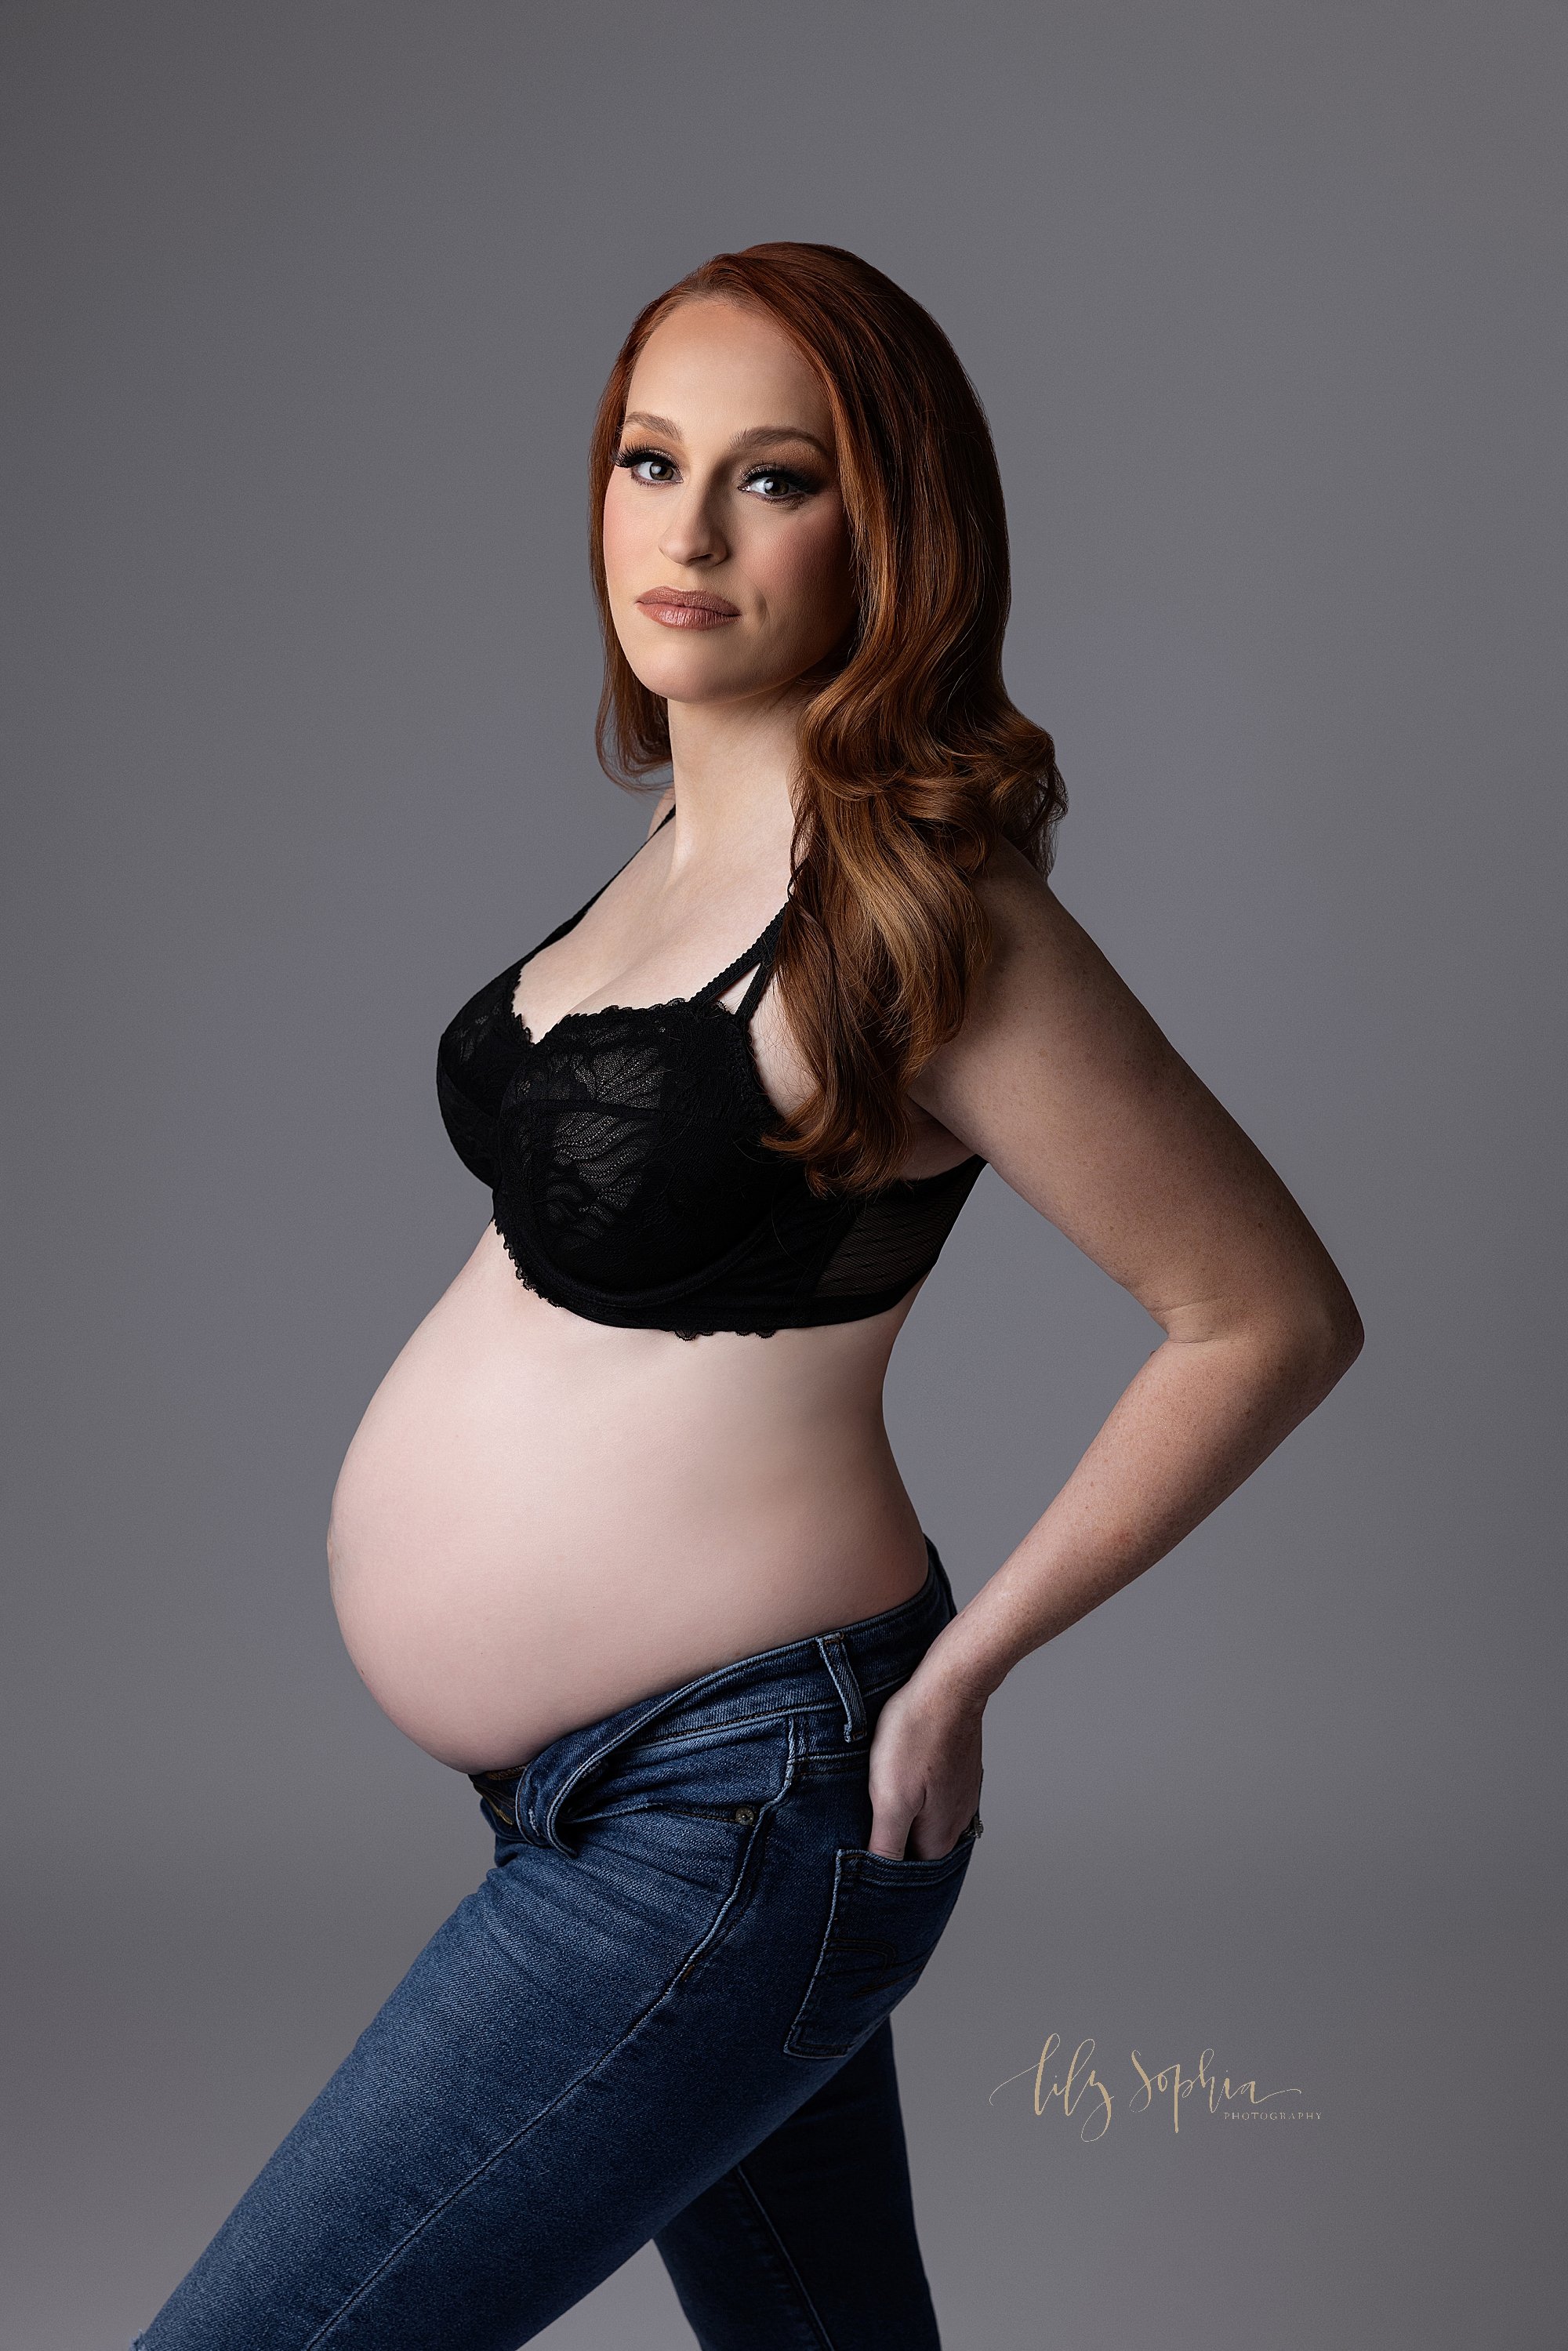  Fashion lighting is used in this maternity session using the modern maternity style as the red-headed pregnant woman stands to show the profile of her bare belly wearing a lace black bra and an unzipped pair of blue jeans with her left hand in her b